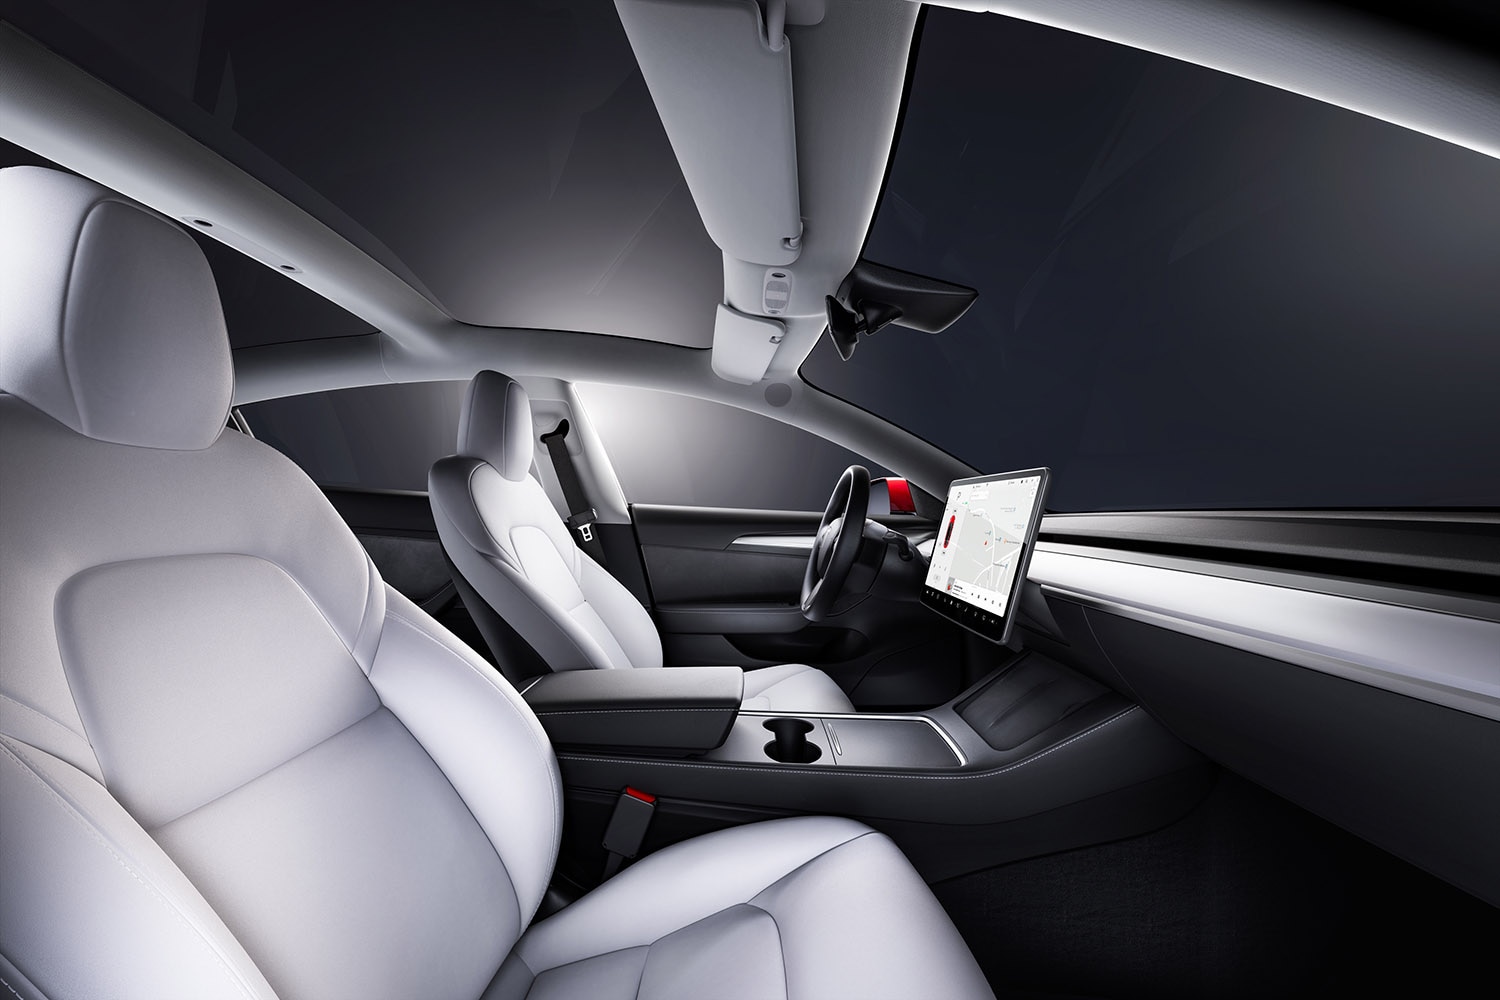 Interior of Tesla Model 3 with seats and infotainment screen lit up